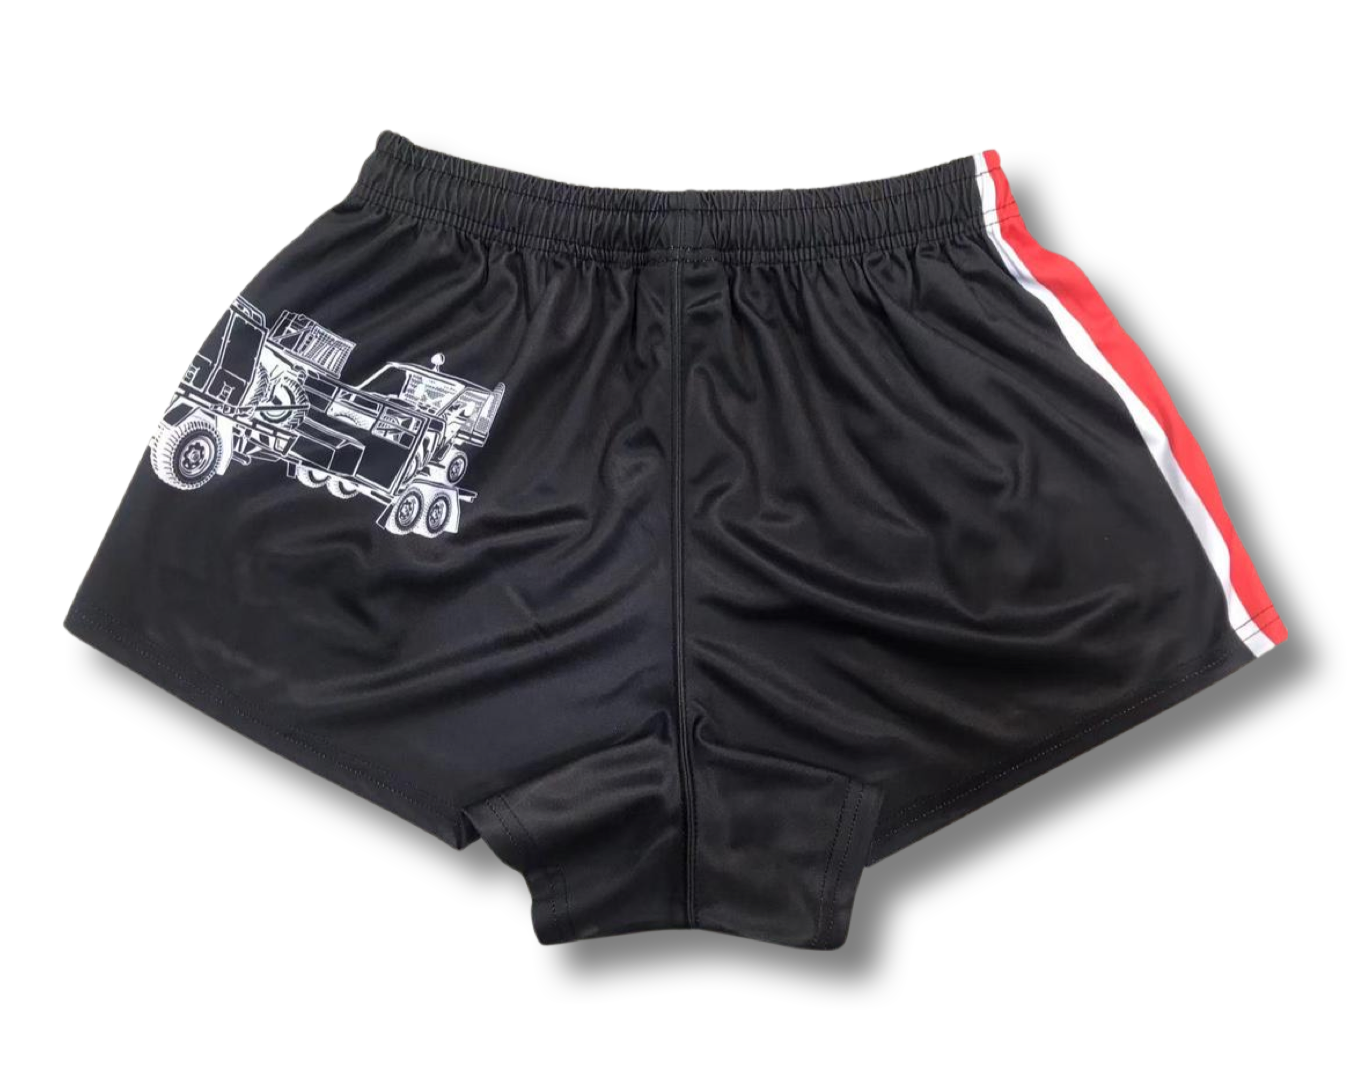 🔥NEW🔥 Footy Shorts - CRUISER COUNTRY - Hogs Dogs Quads Shop